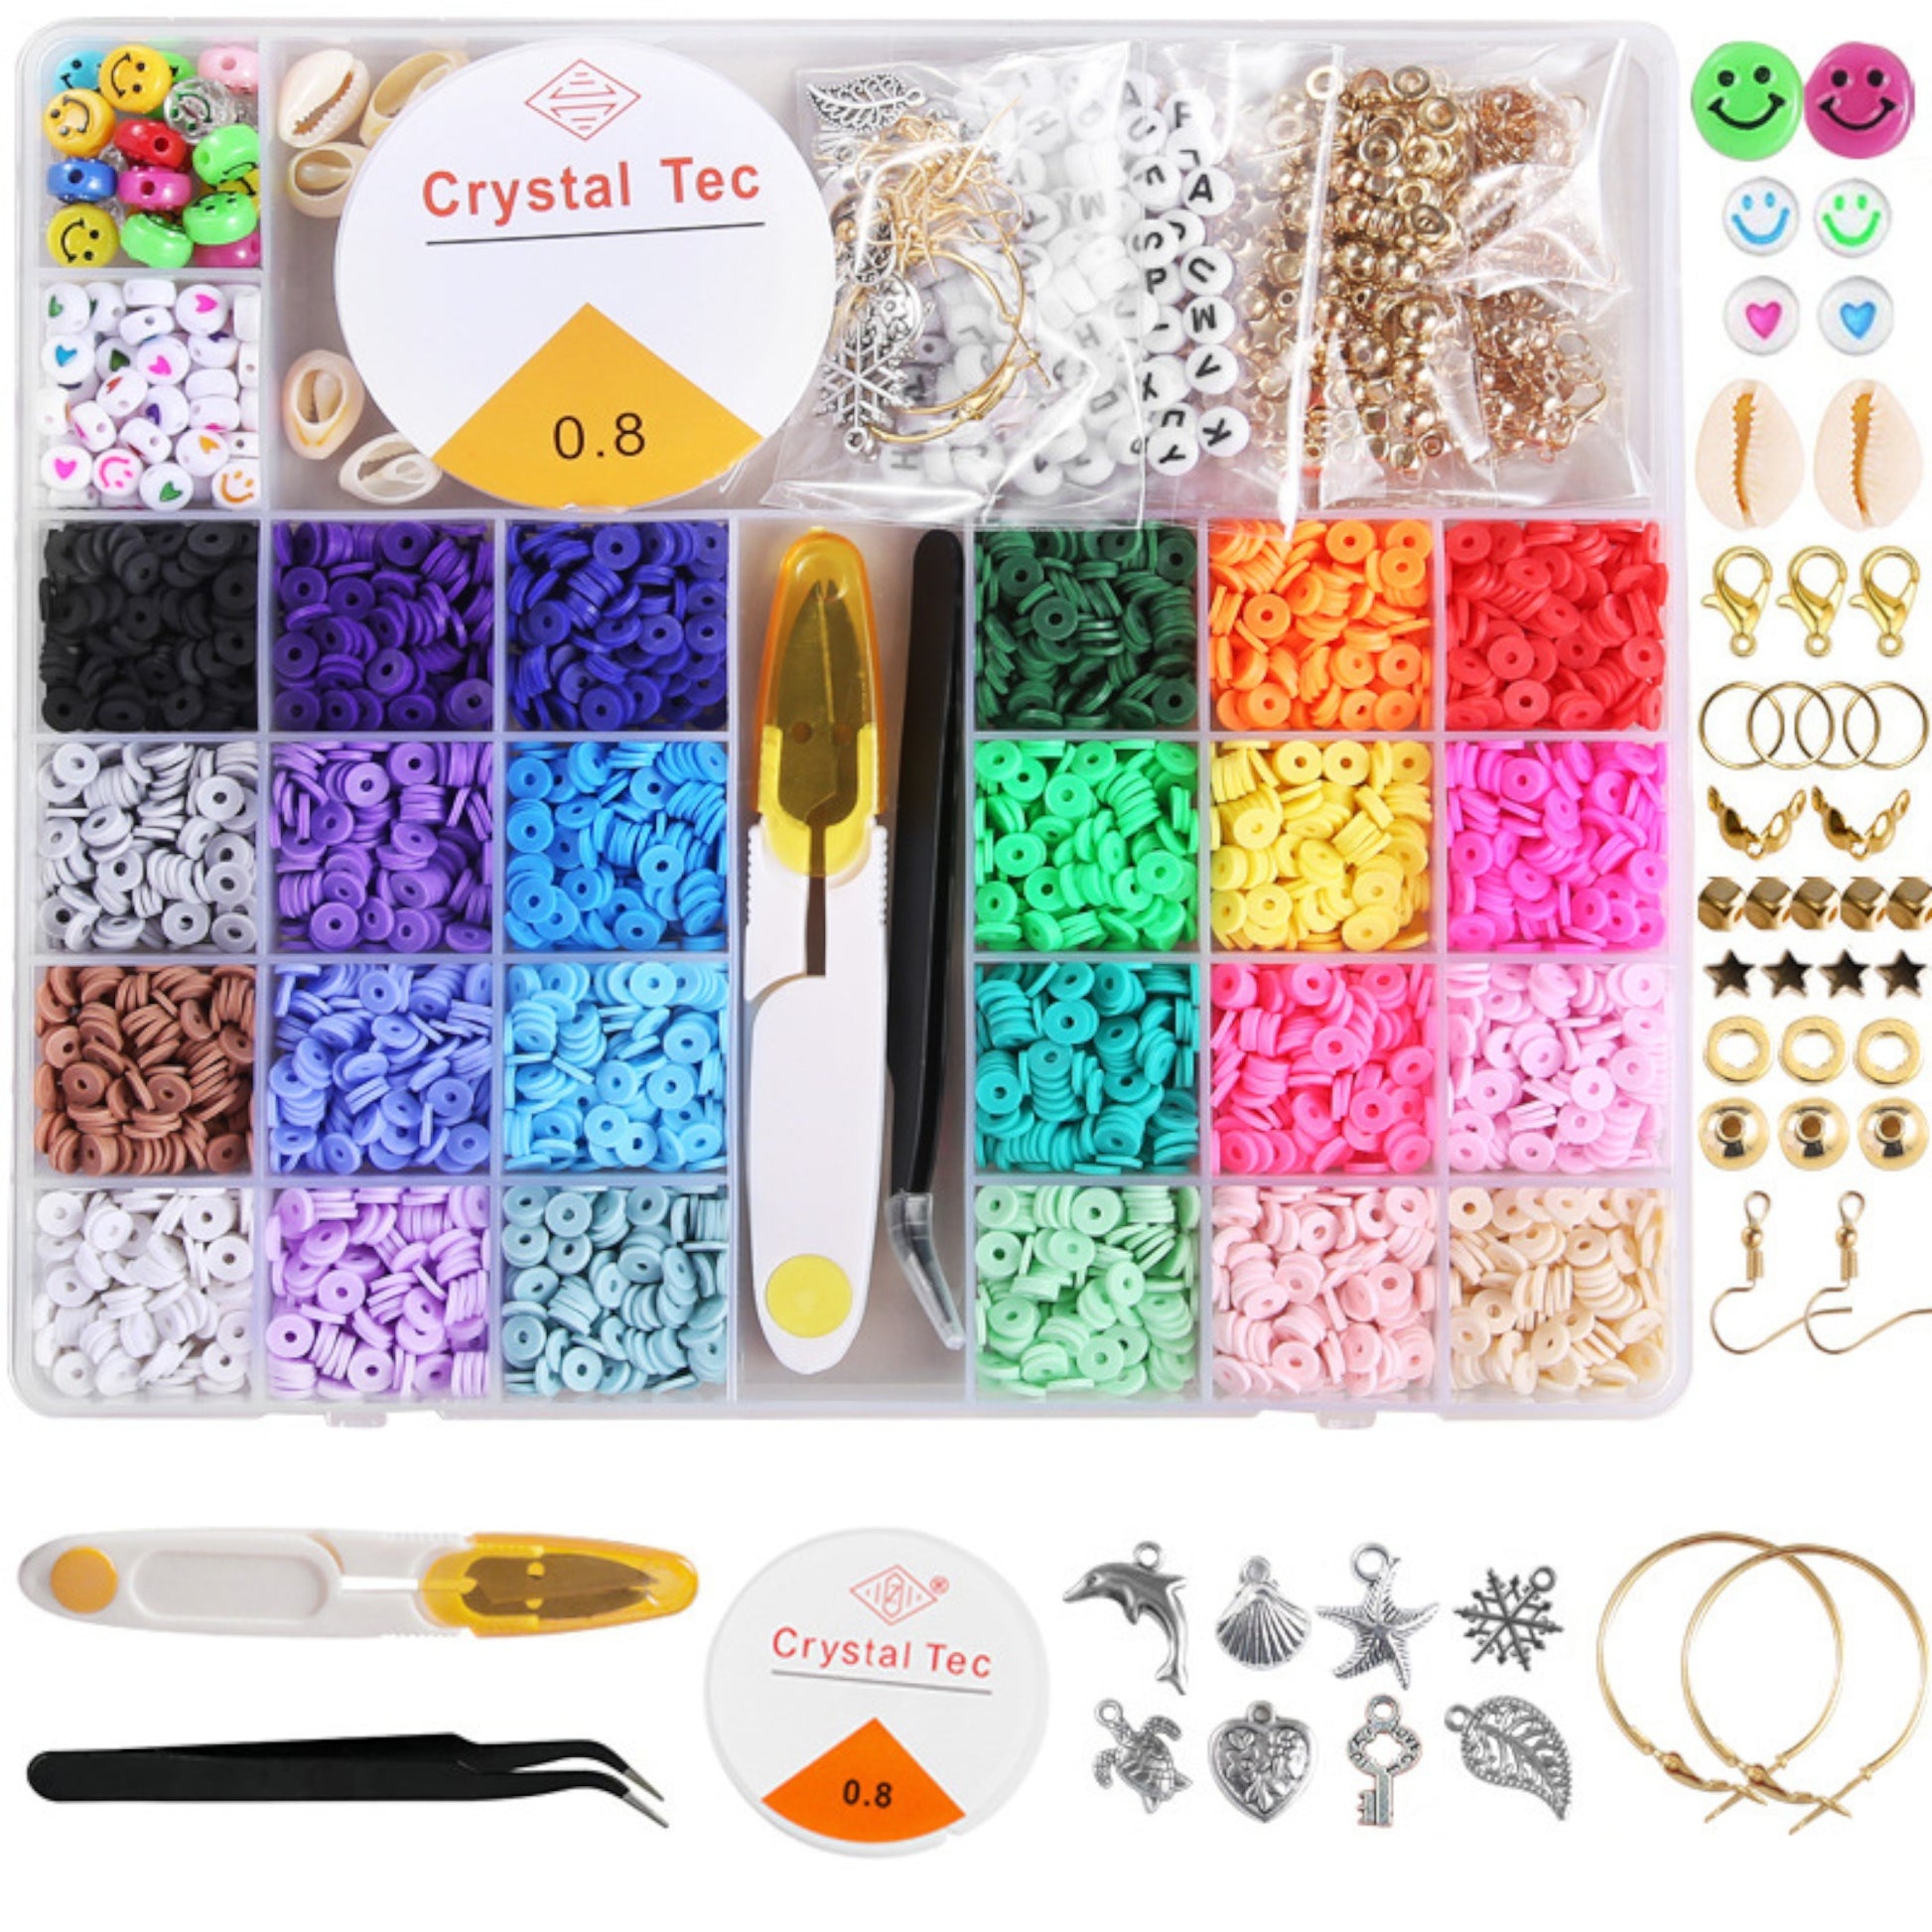 DIY Beading kits for making bracelets and other jewelry. - VadymShop